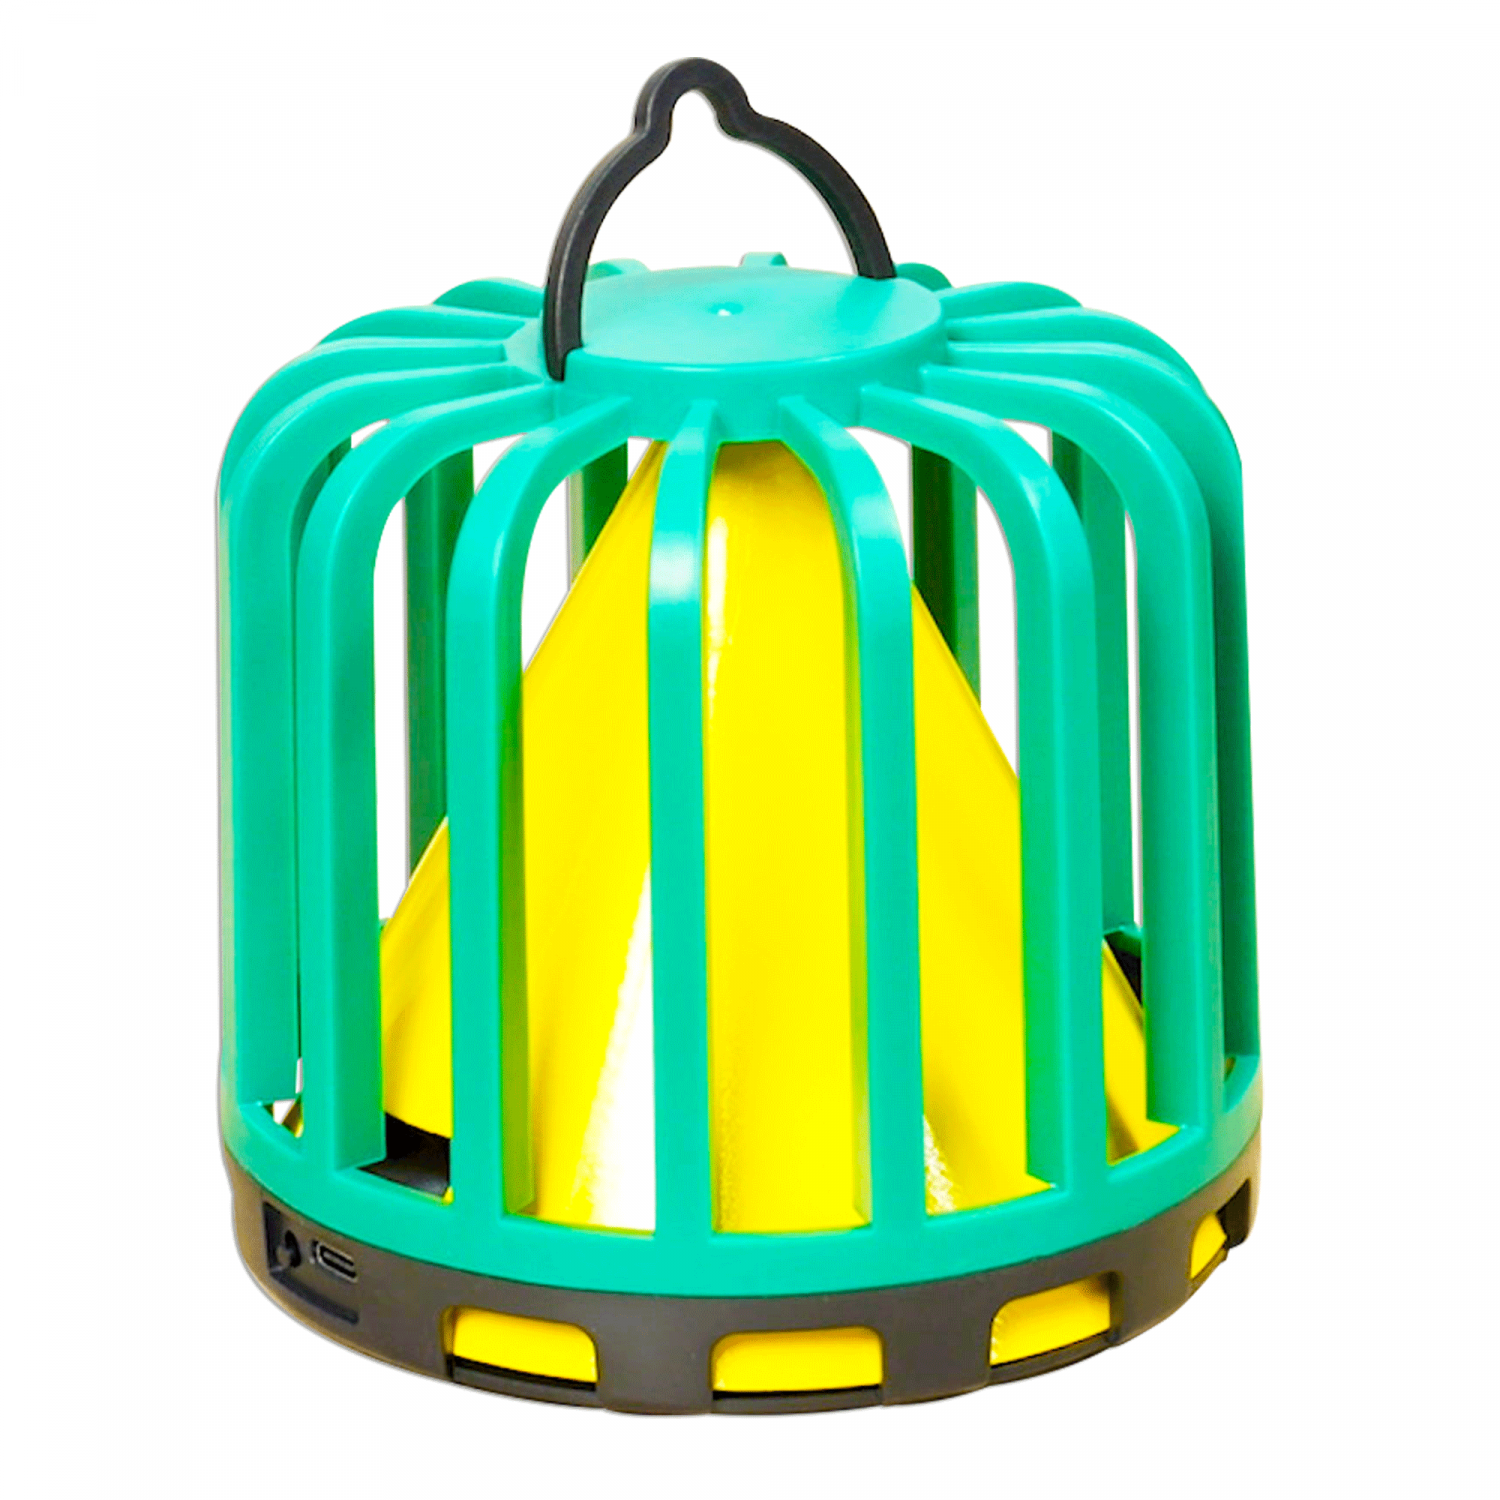 Genius Ideas GI-054561: FLYTRAP Lighted Insect Trap "Cactus"